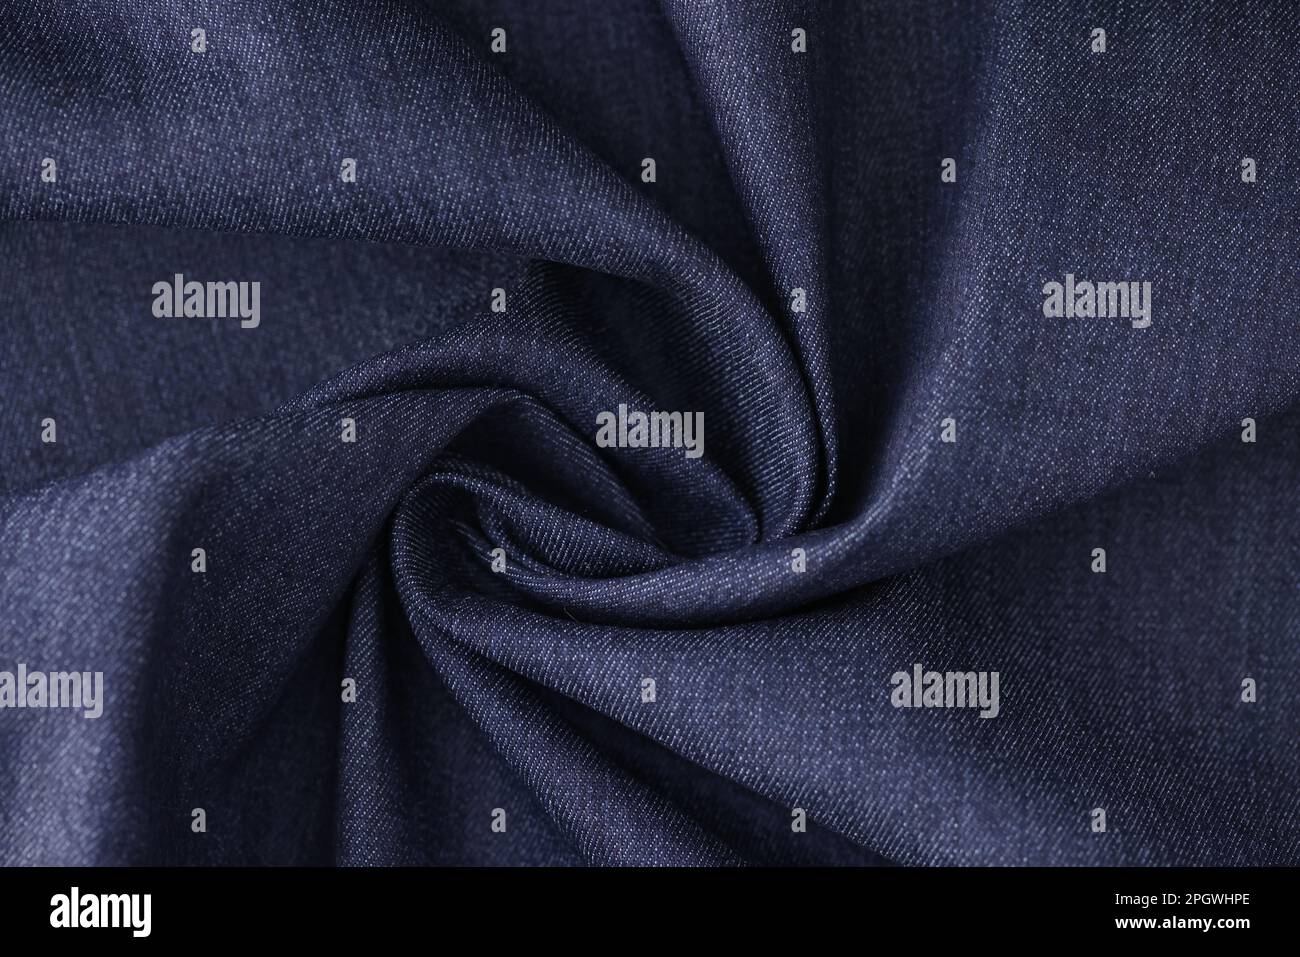 Dark blue dense fabric for suits sewing upper view Stock Photo